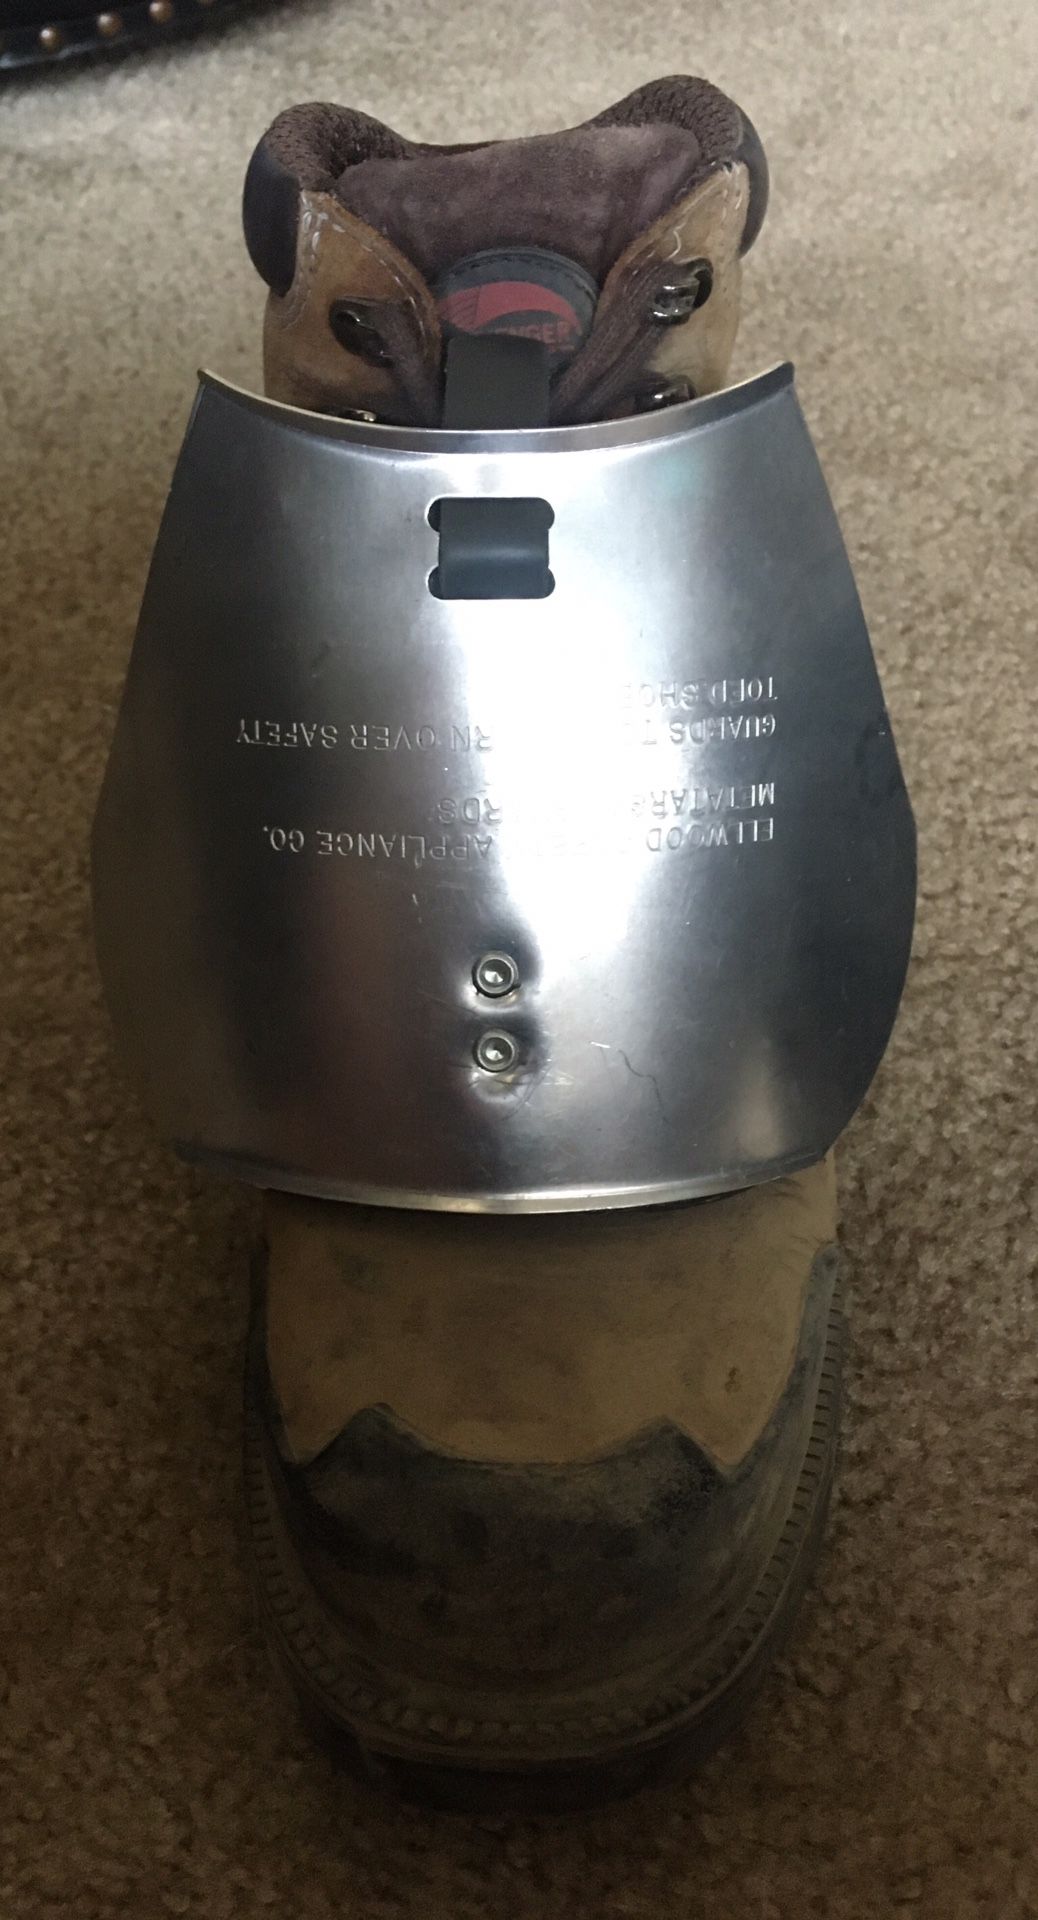 Elwood Safety Metatarsal Guards 800 For Sale In West Covina Ca Offerup